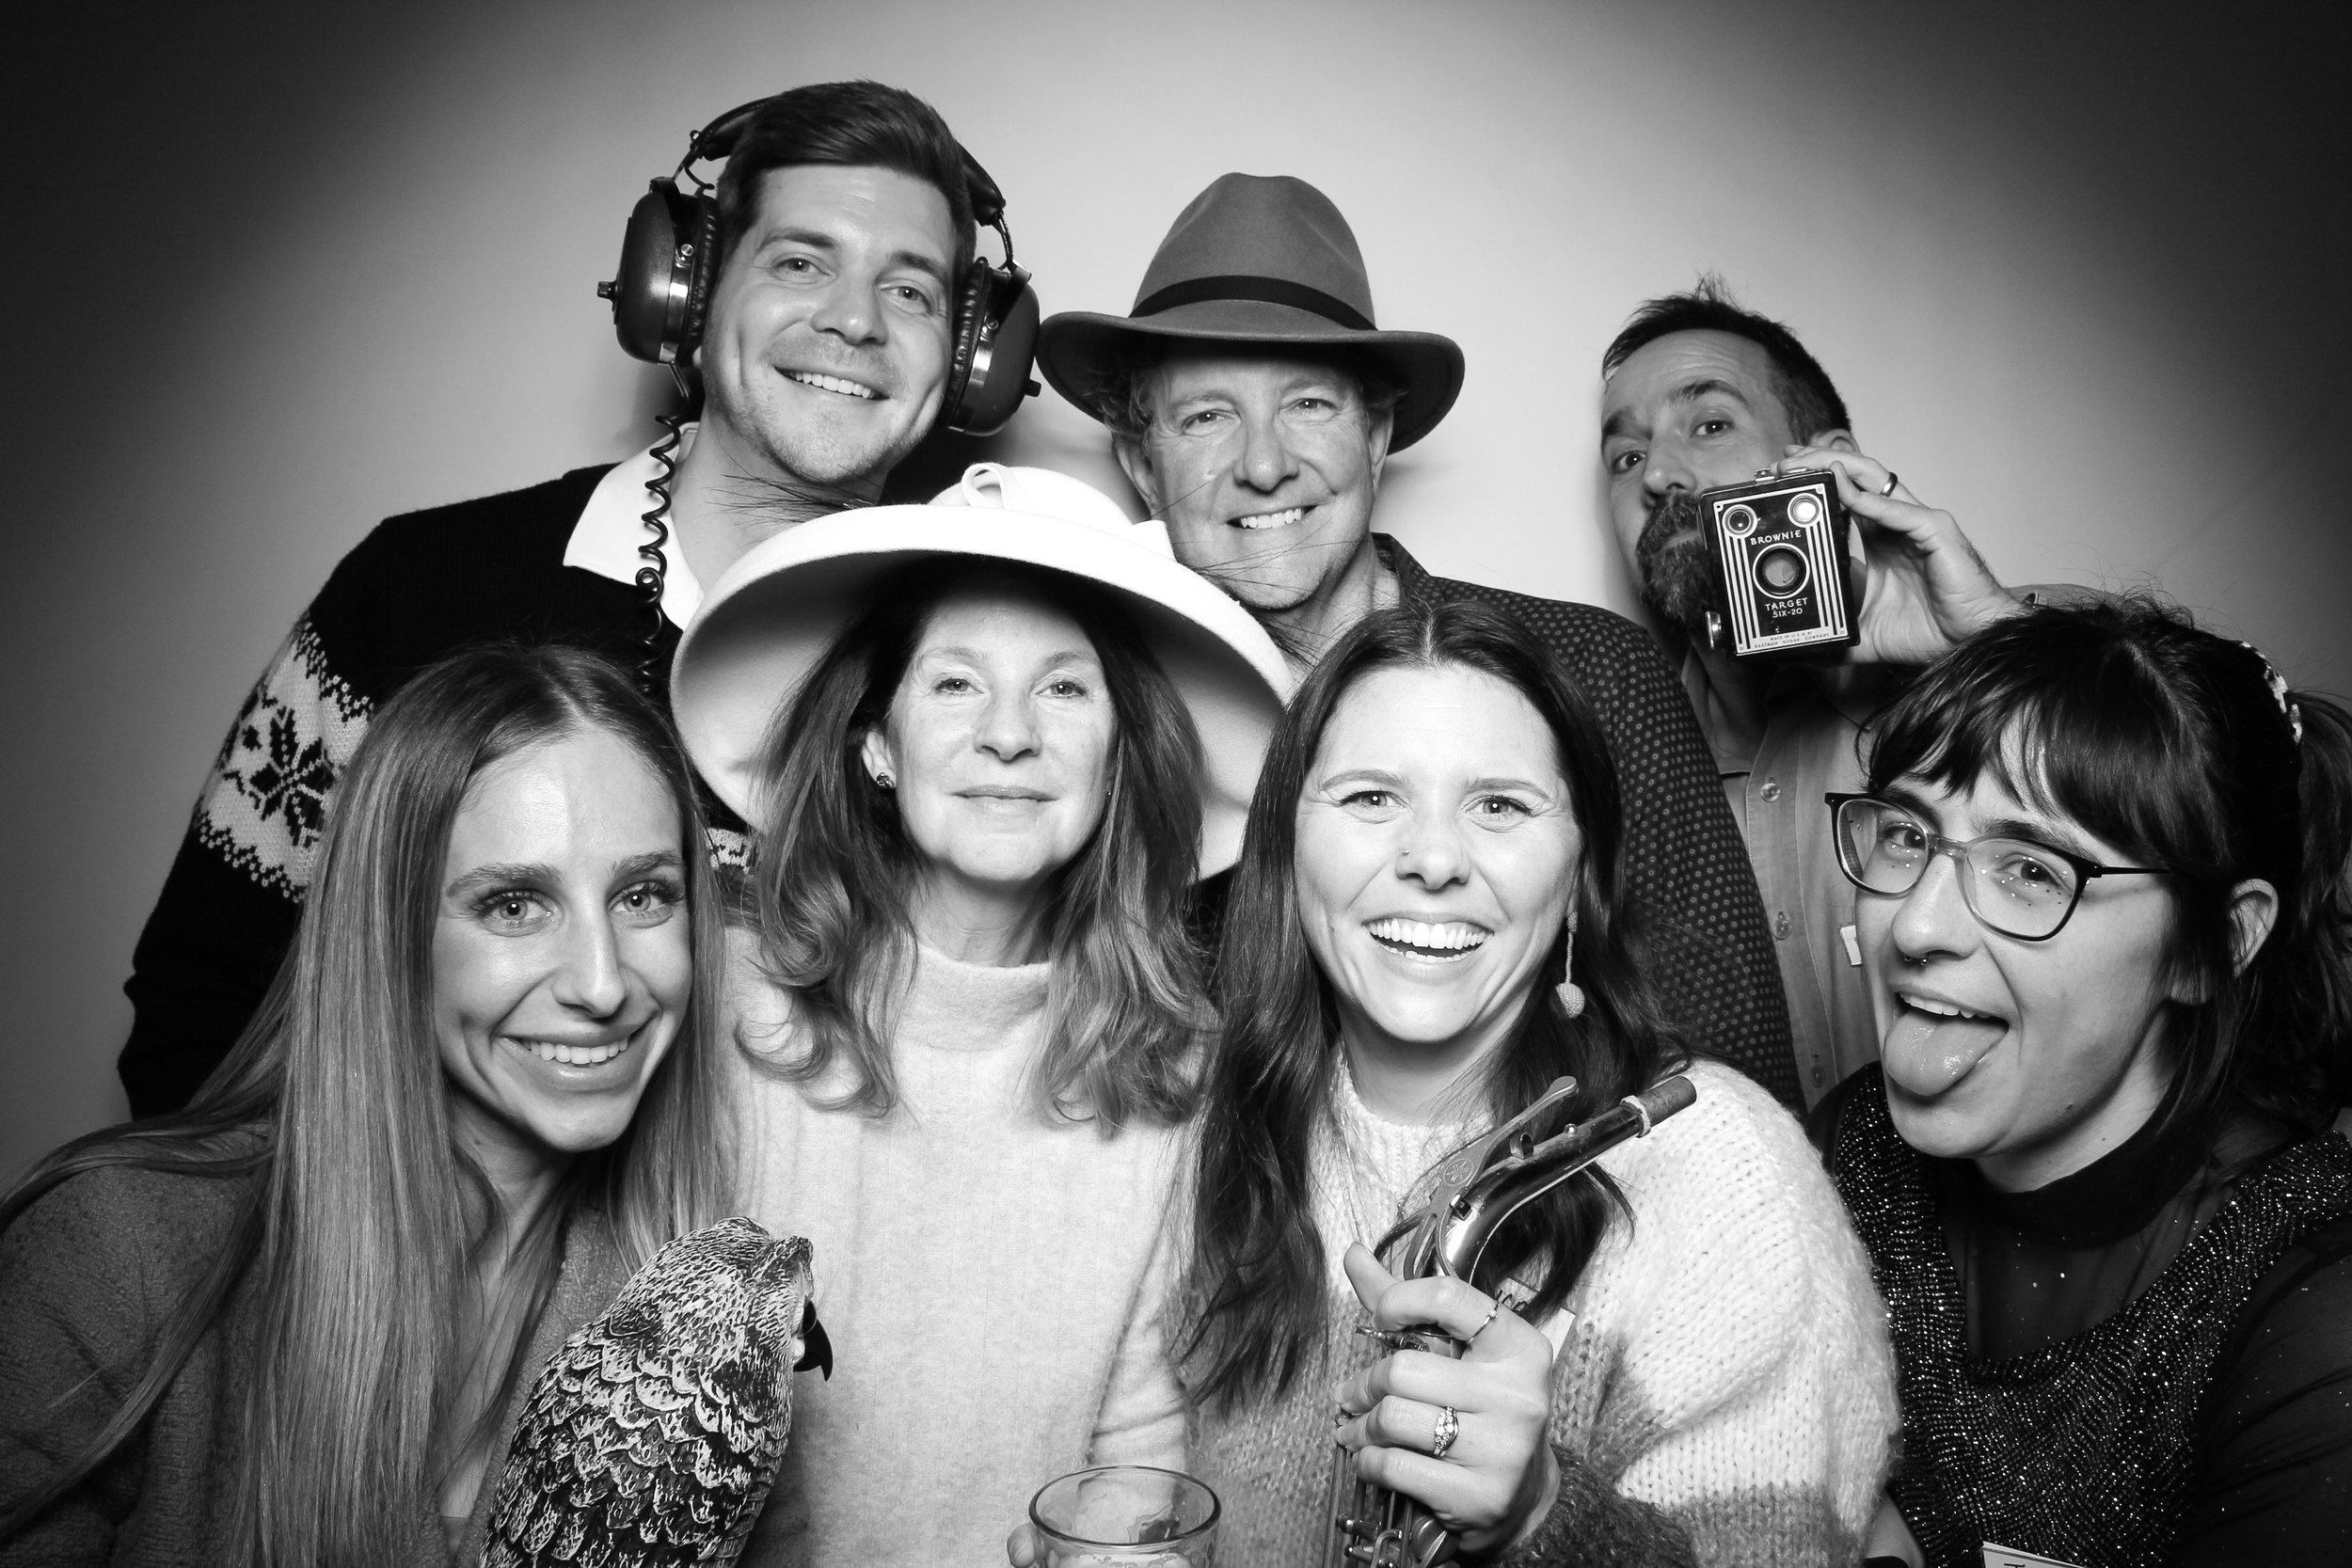 Highline_Chicago_Holiday_Party_Photo_Booth_003.jpg